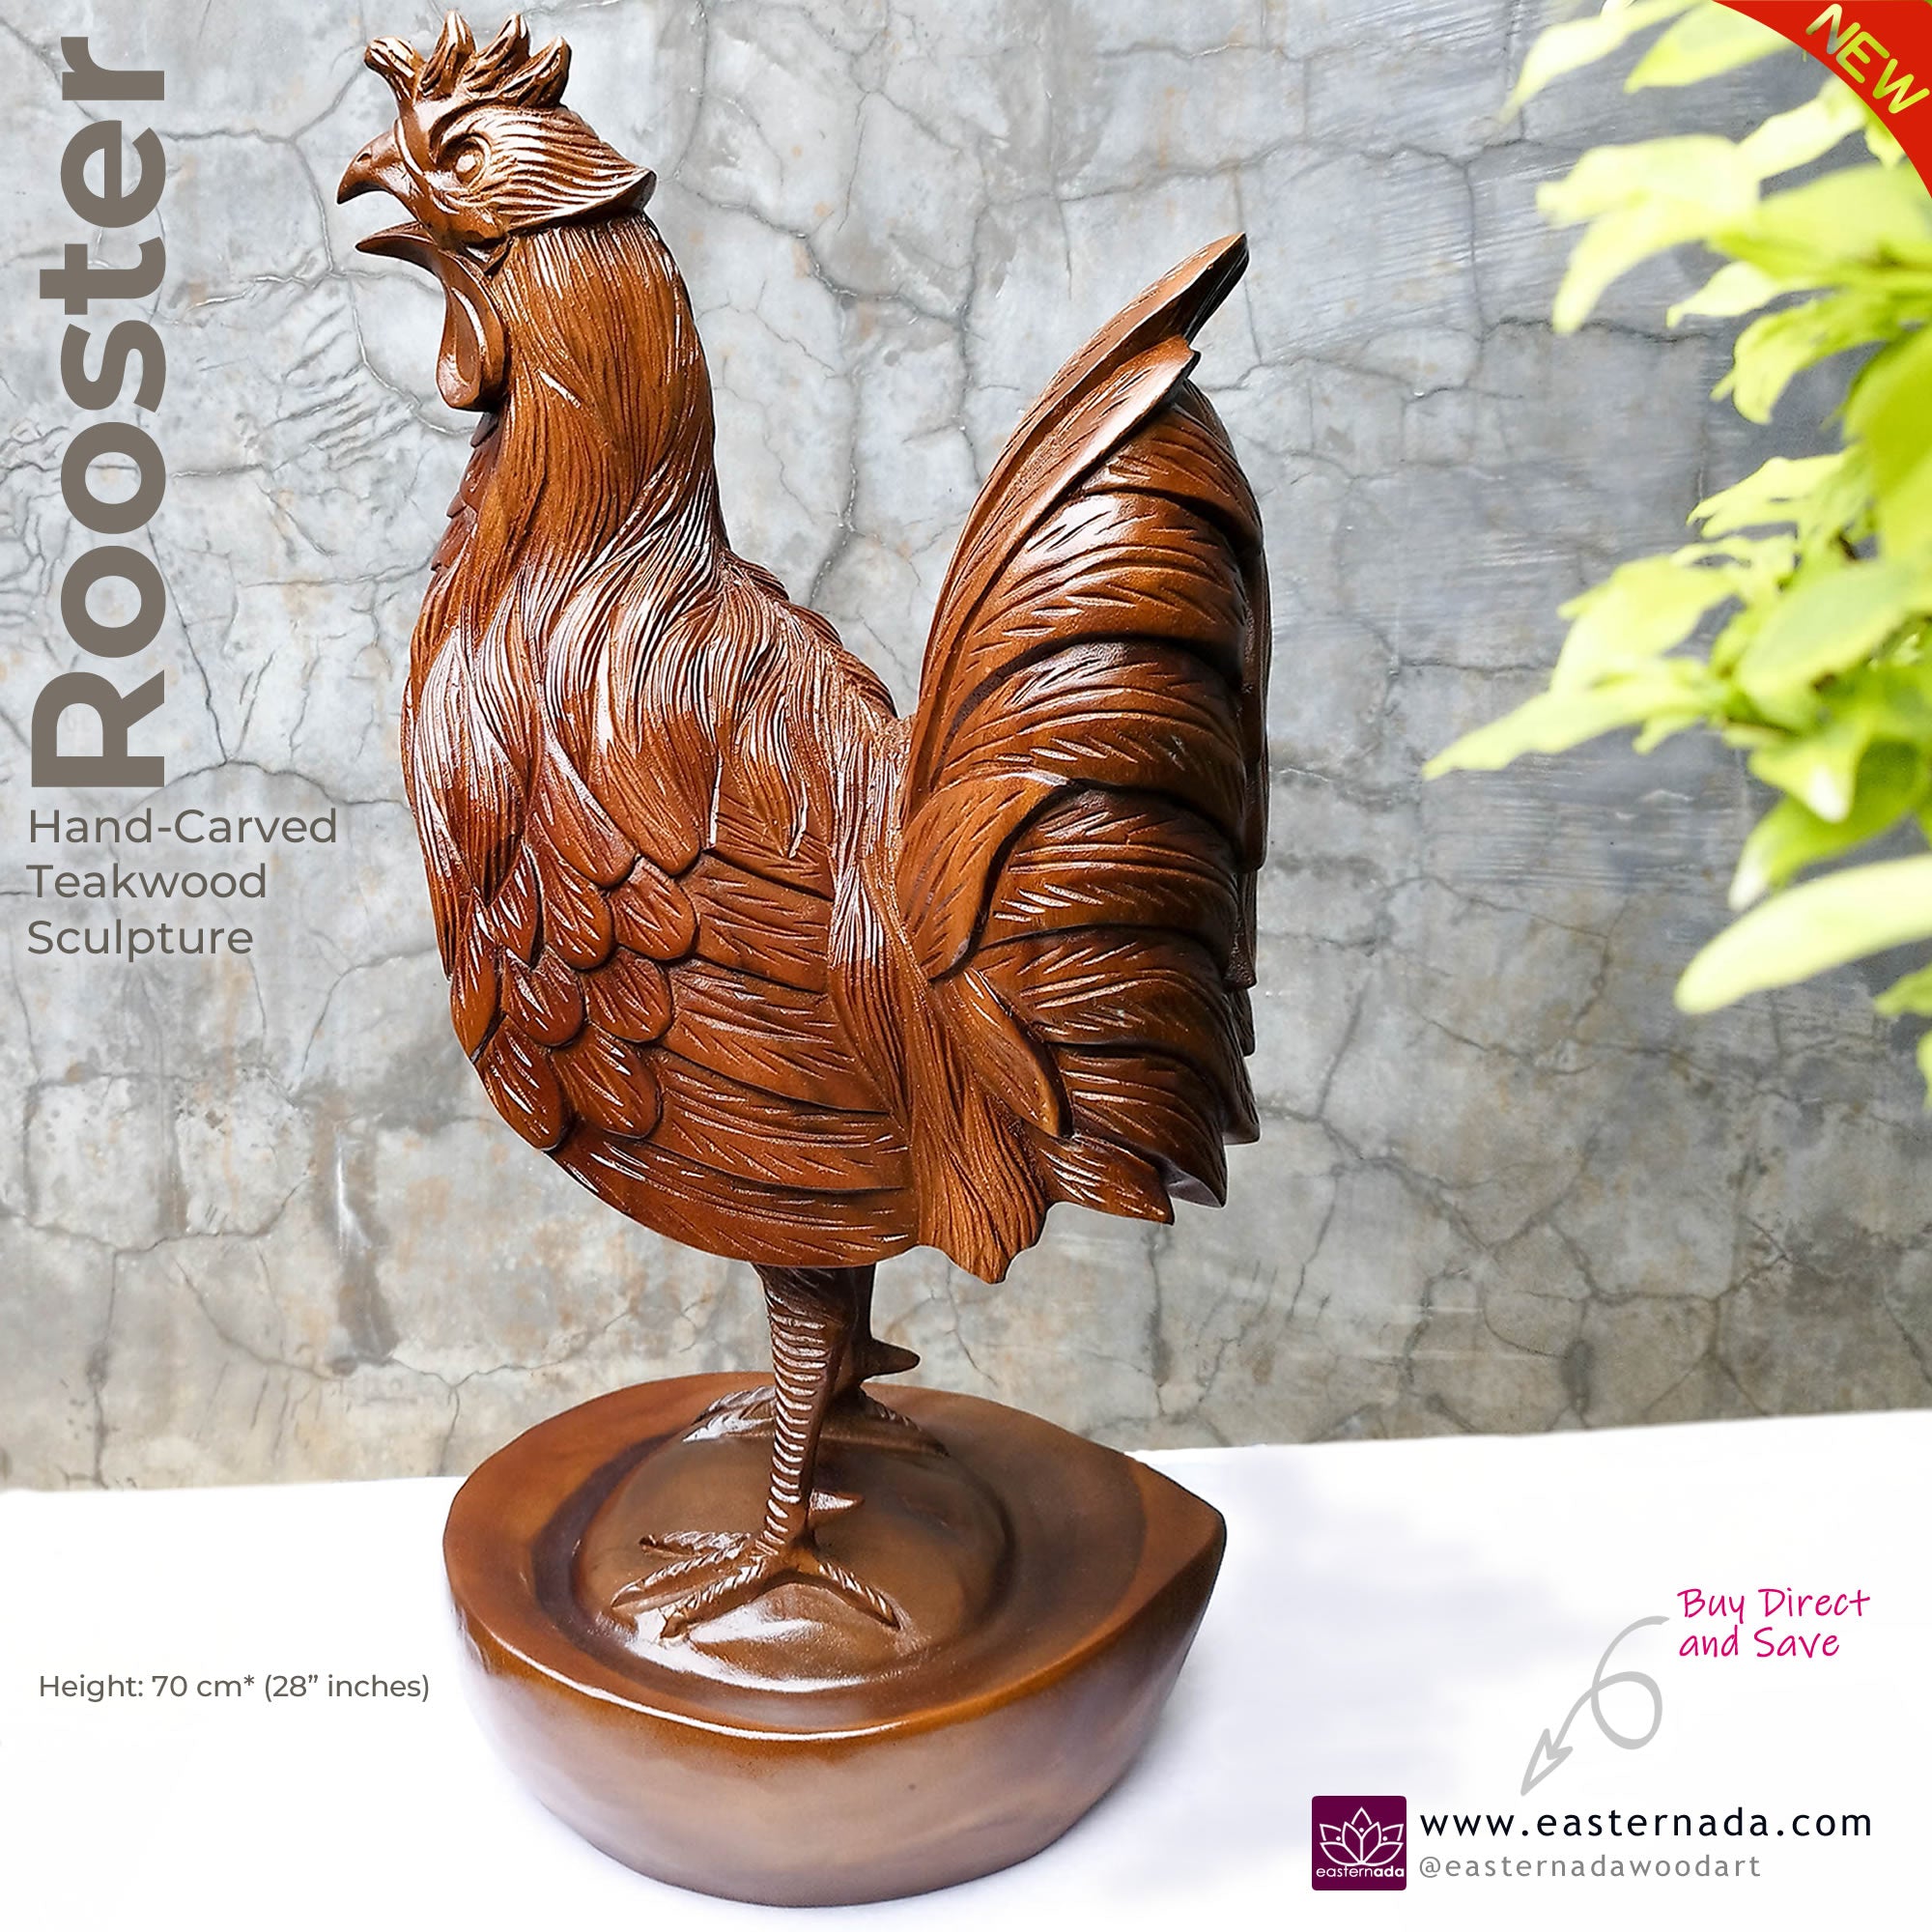 This stunning large hand-carved teakwood decorative Rooster Chicken sculpture is quite impressive and unique gift. Easternada